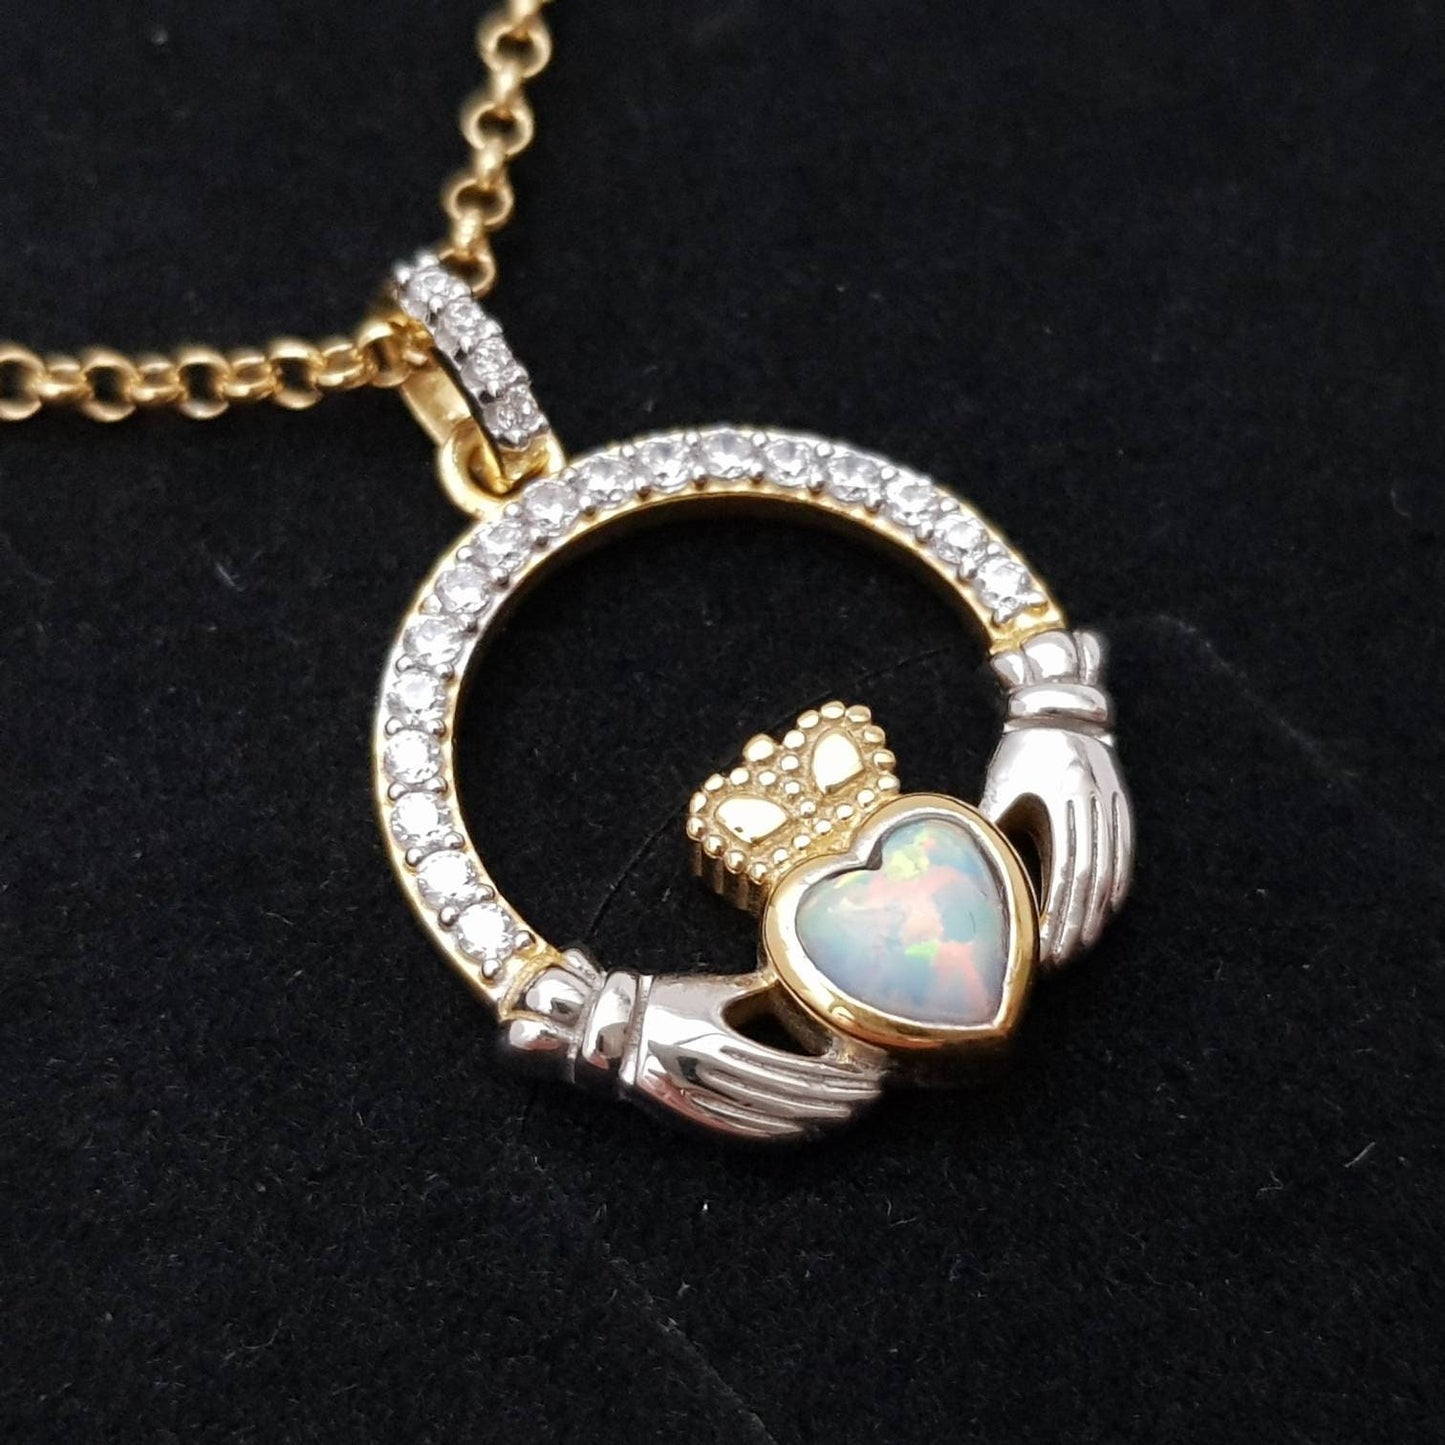 White Opal Claddagh pendant, claddagh necklace, yellow gold claddagh pendant October birthstone